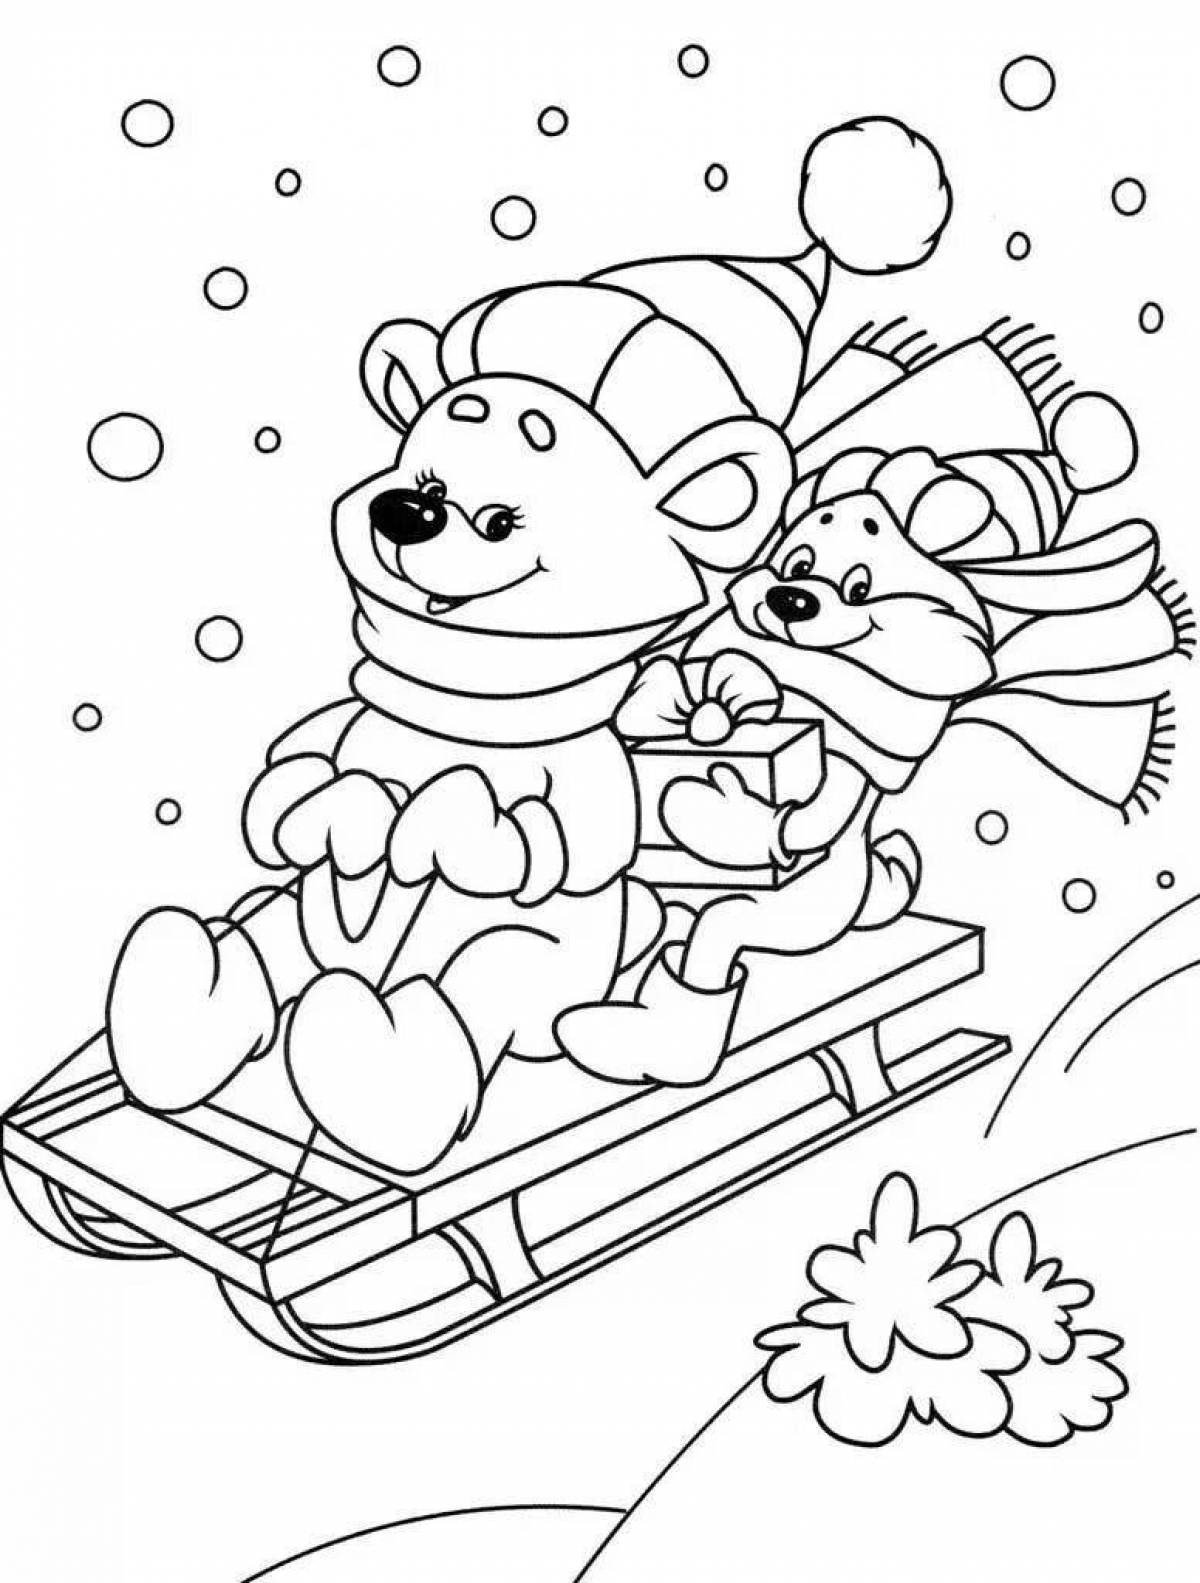 Magical winter coloring book for kids